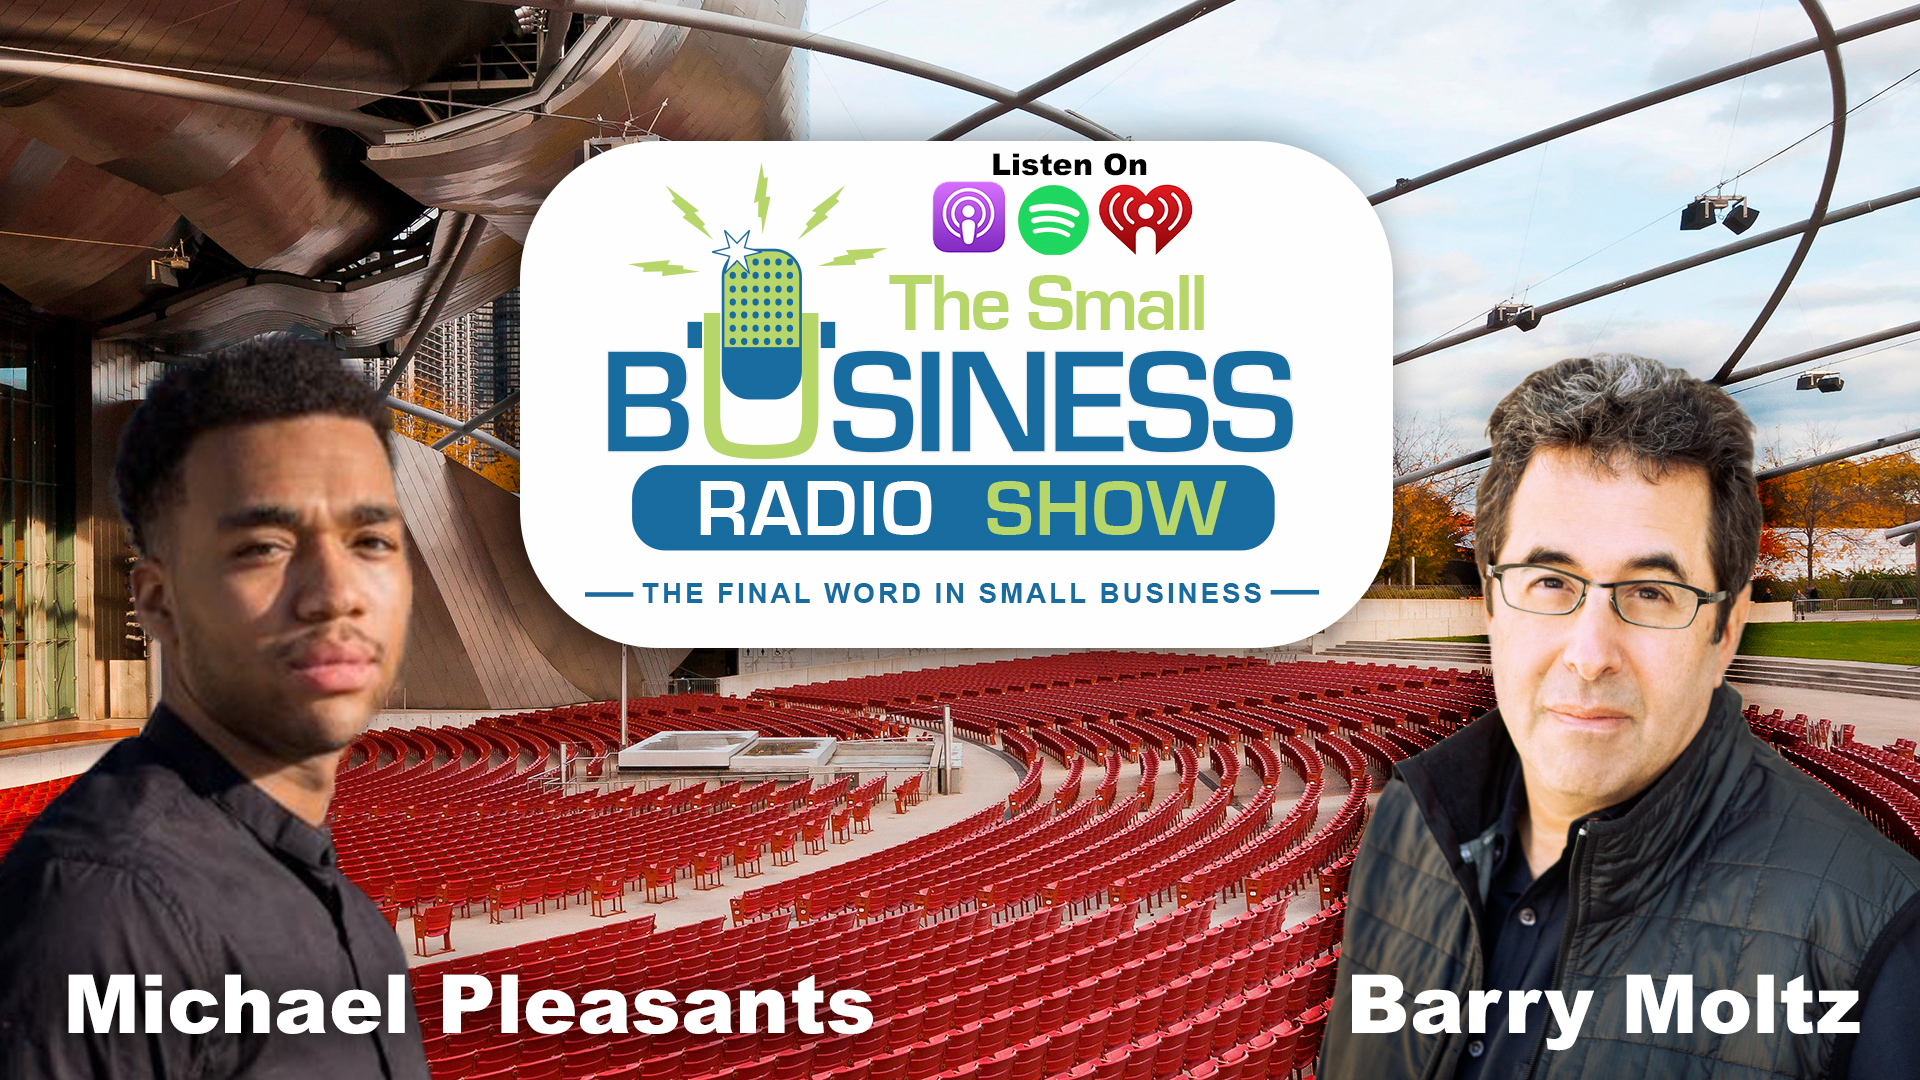 Michael Pleasants on The Small Business Radio Show